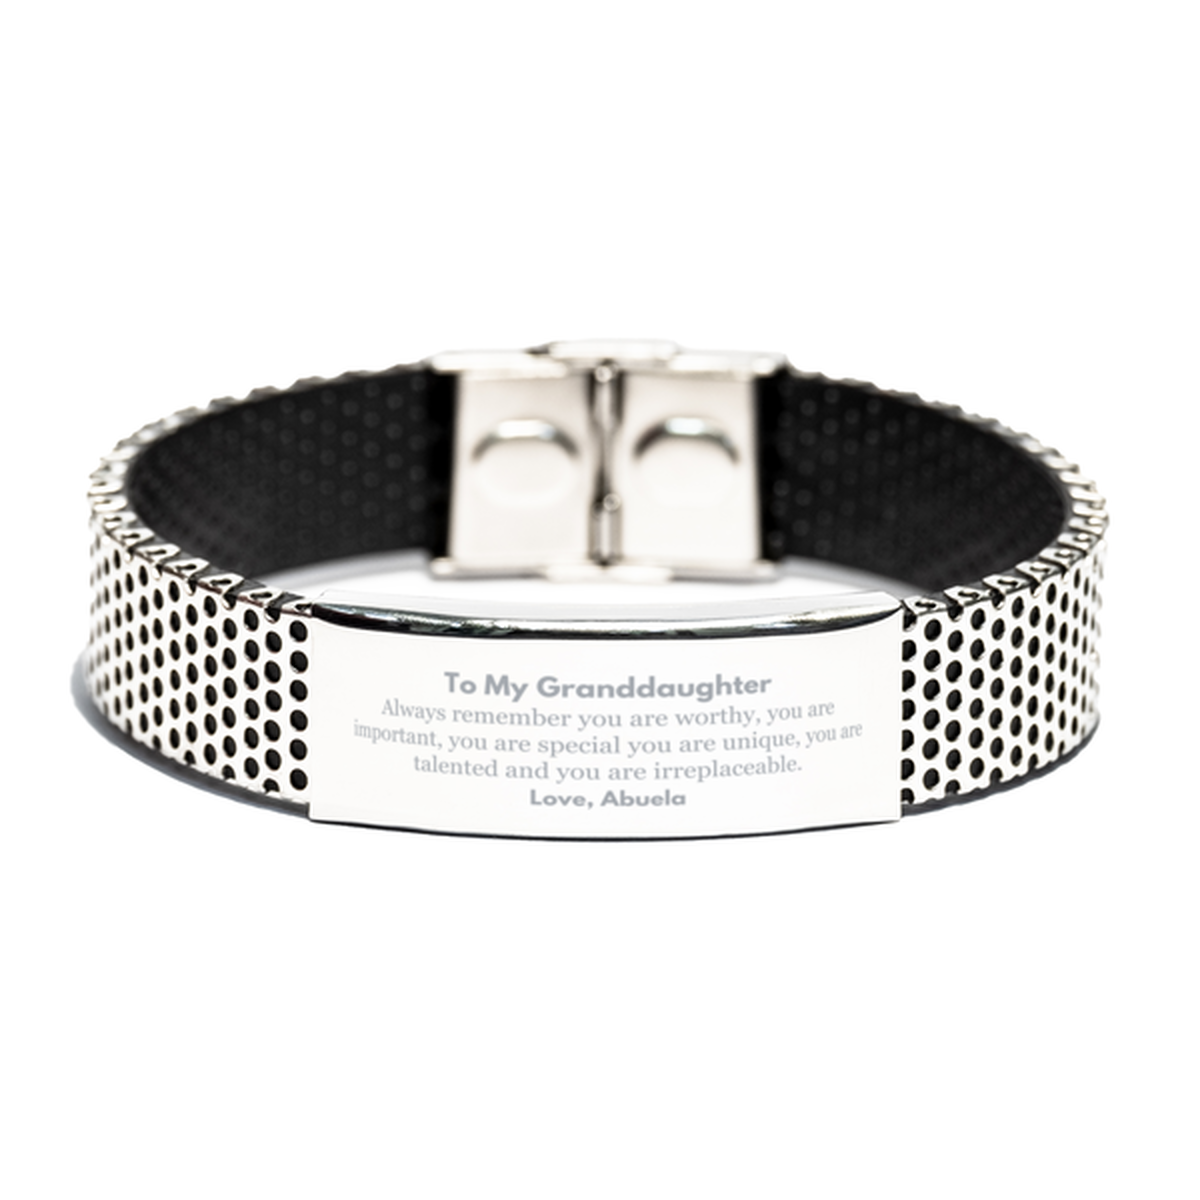 Granddaughter Birthday Gifts from Abuela, Inspirational Stainless Steel Bracelet for Granddaughter Christmas Graduation Gifts for Granddaughter Always remember you are worthy, you are important. Love, Abuela